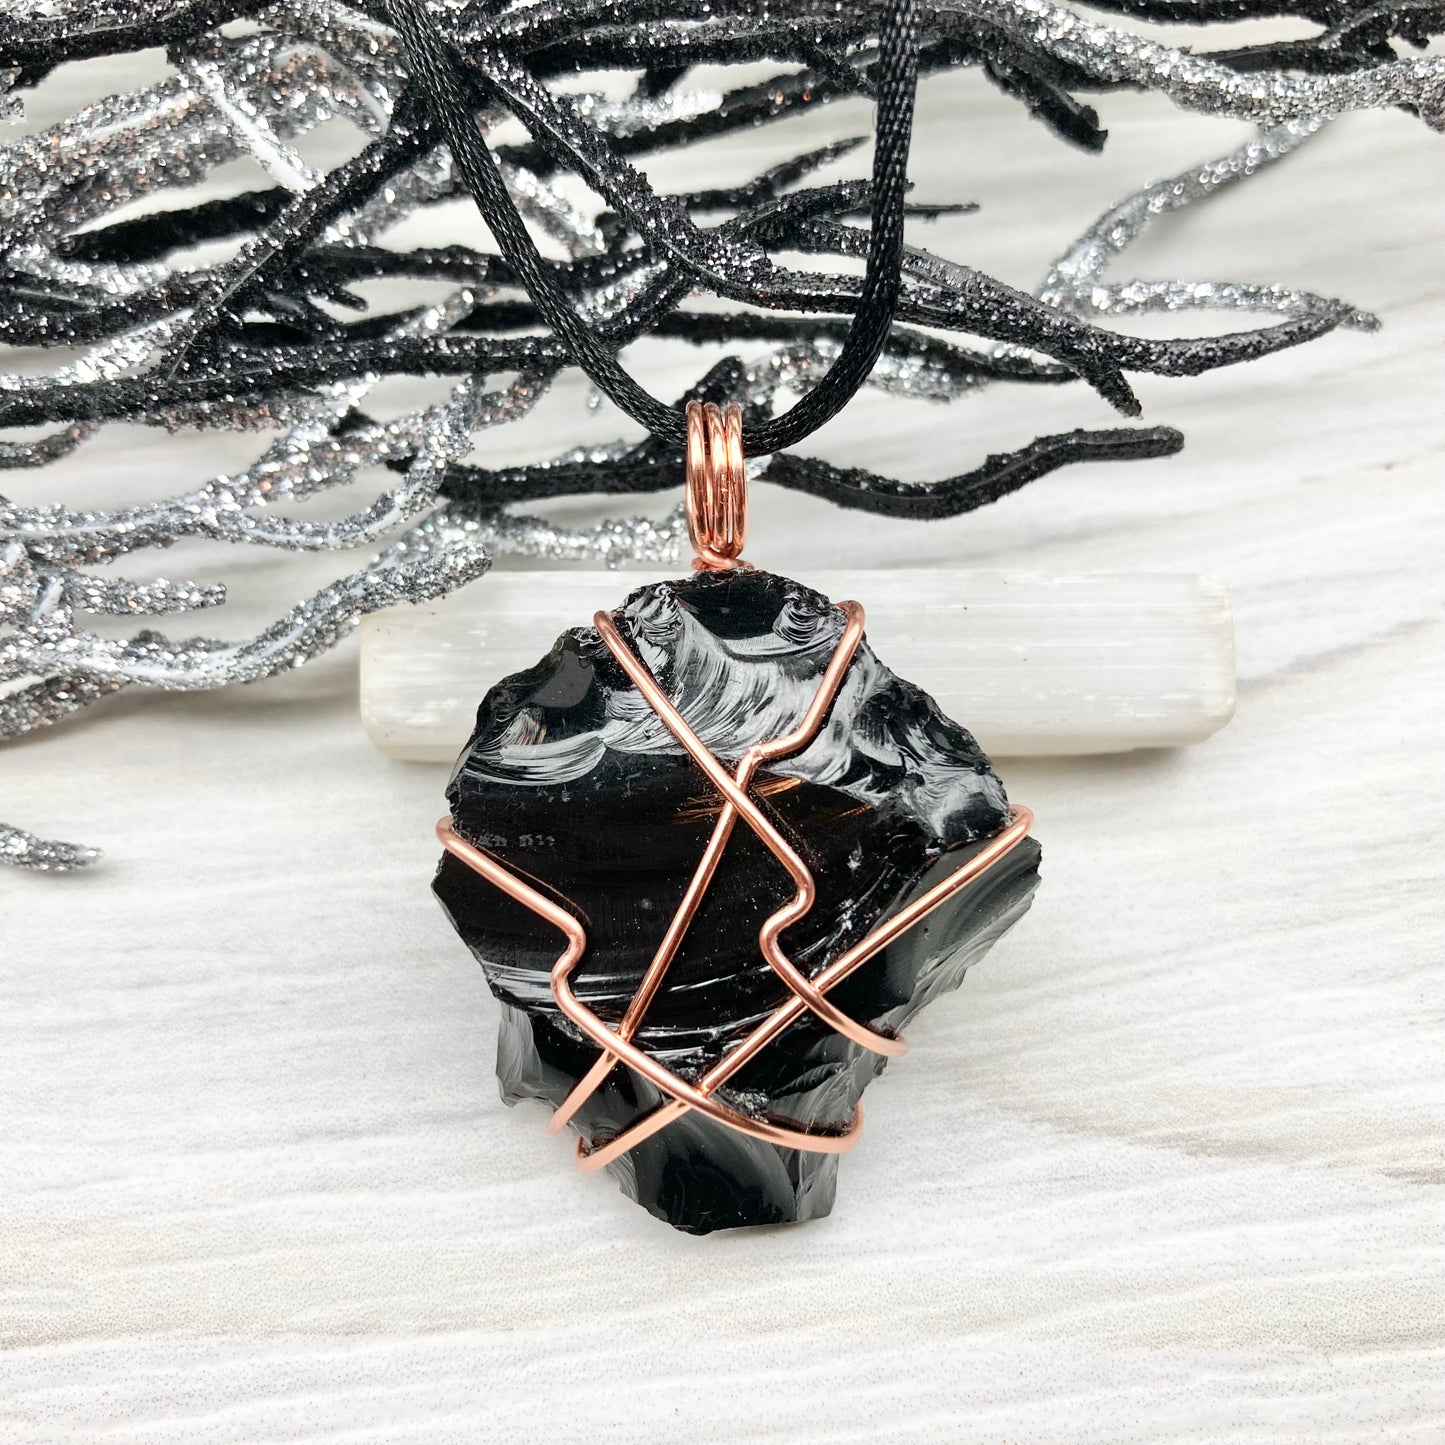 Raw Black Obsidian Necklace. Natural Obsidian Crystal Wrapped With Copper Wire. Comes On A Black Necklace. Witchy Pagan Style Jewelry.